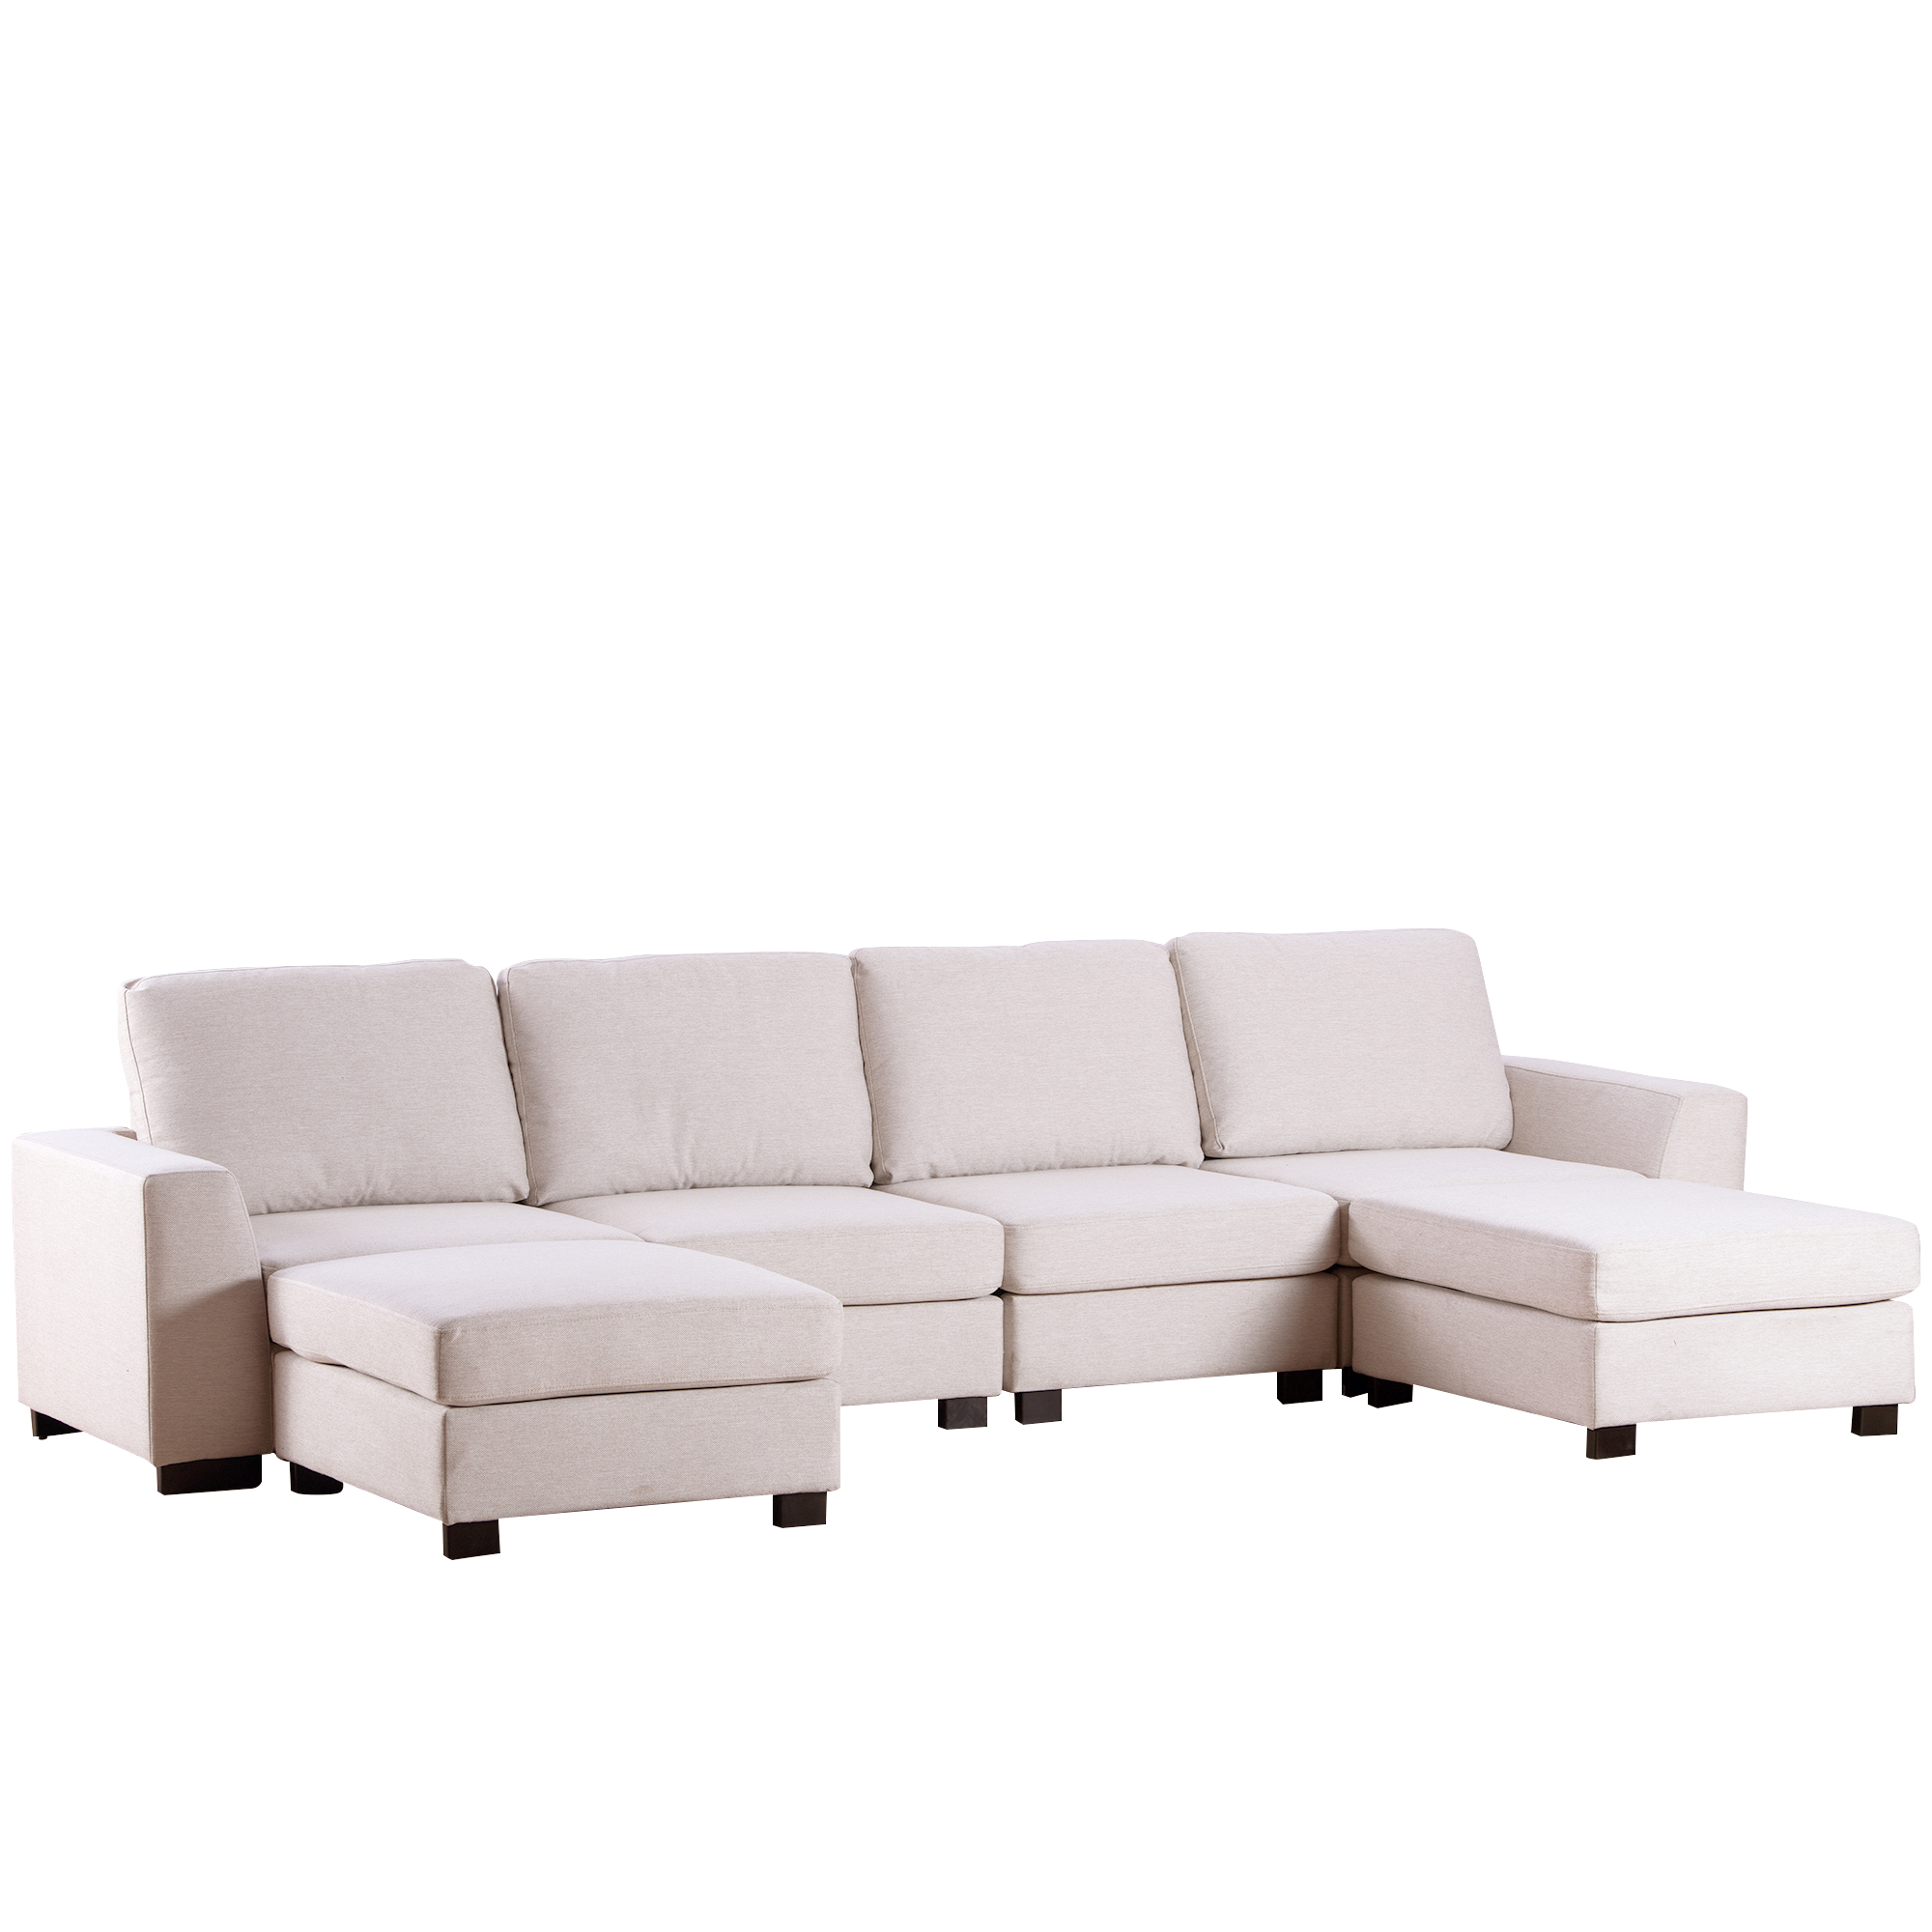 3 Pieces U-Shaped Sofa With Removable Ottomans - WY000264AAA